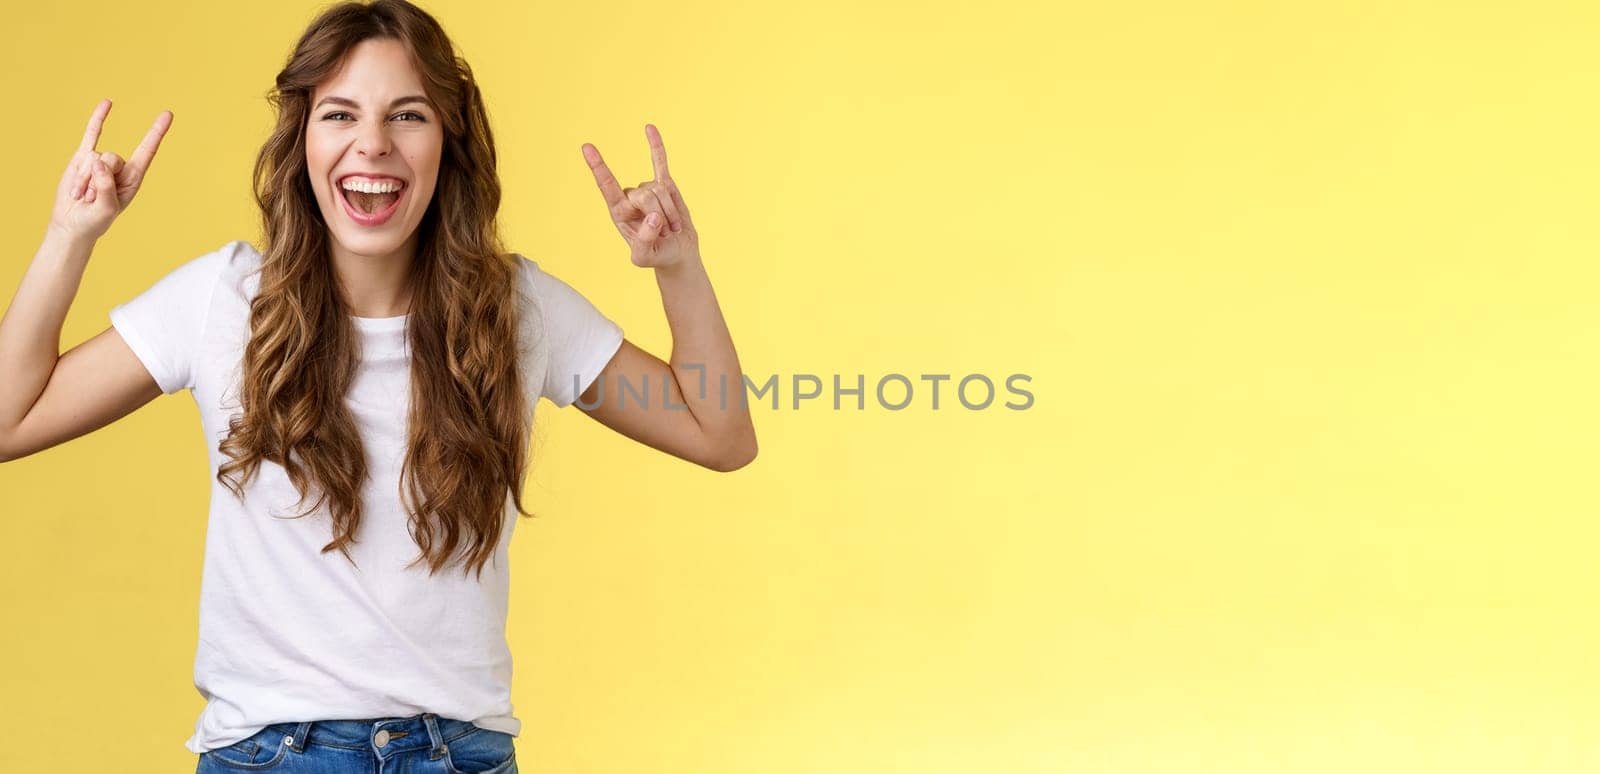 Girl having fun excellent awesome concert enjoy live music show rock-n-roll heavy metal gesture yelling upbeat happy attend cool festival party smiling broadly show tongue daring yellow background. Lifestyle.